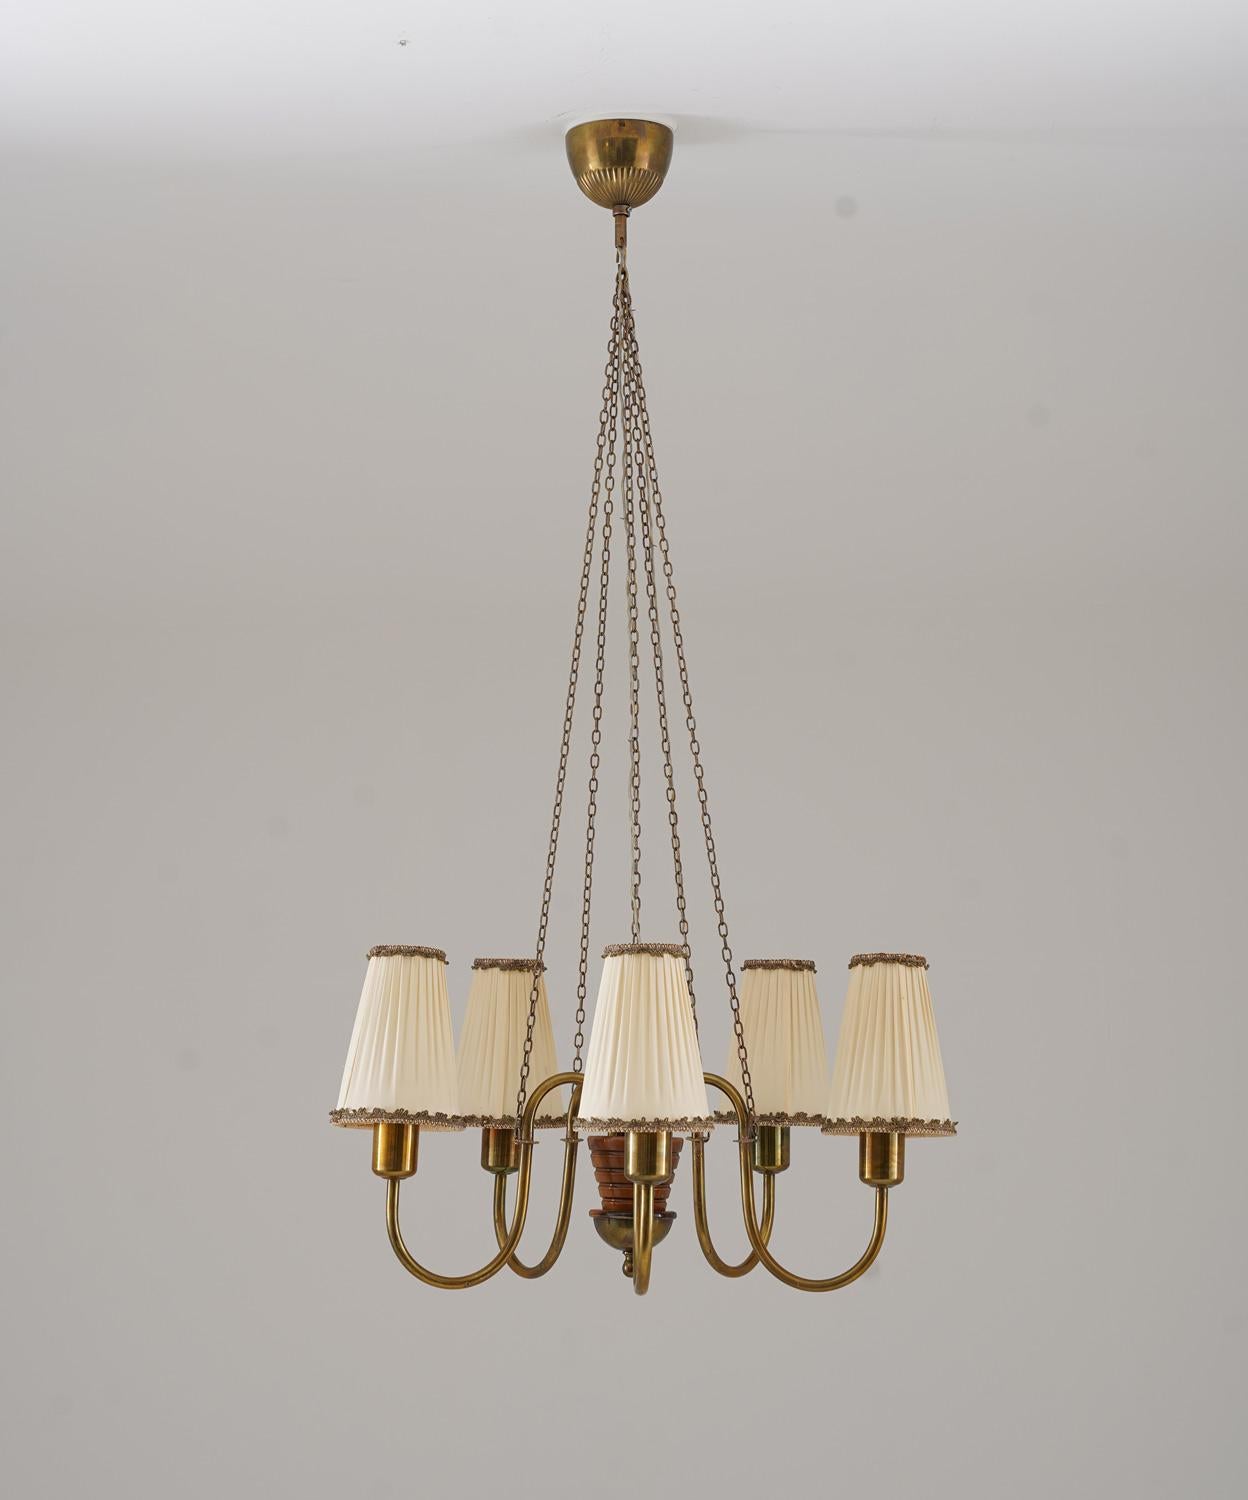 Very elegant Swedish Modern Chandelier, consisting of 5 light sources, supported by brass rods that are connected to a wooden center piece. Each light source is hidden by an original fabric shade. The lamp hangs from chains, connecting each arm to